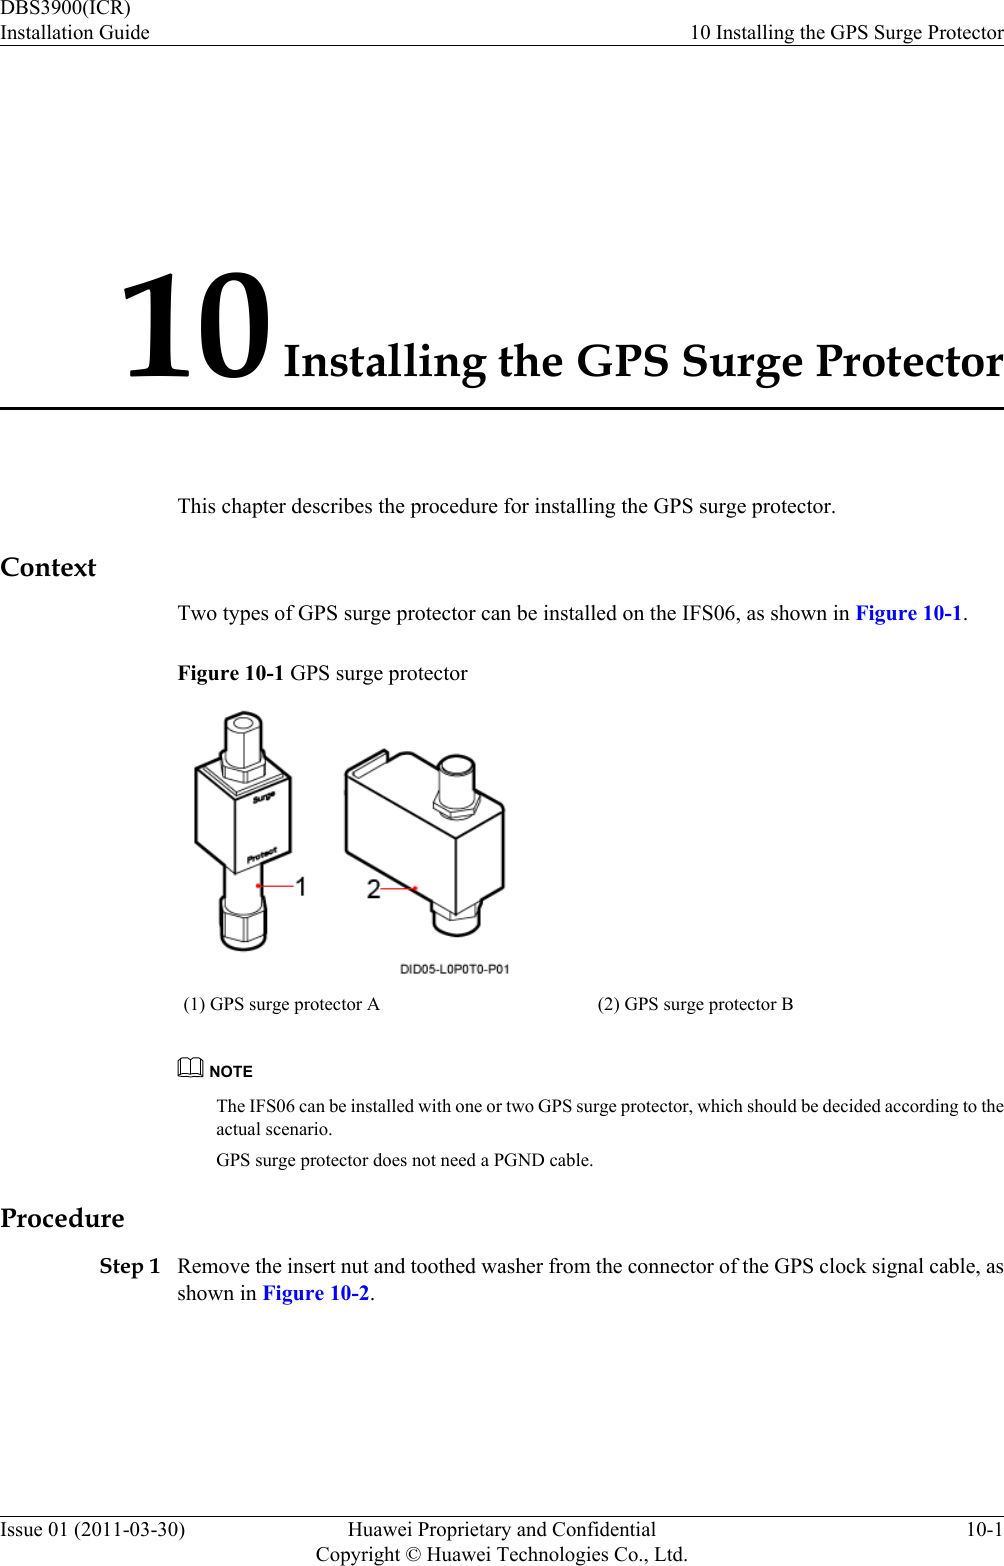 10 Installing the GPS Surge ProtectorThis chapter describes the procedure for installing the GPS surge protector.ContextTwo types of GPS surge protector can be installed on the IFS06, as shown in Figure 10-1.Figure 10-1 GPS surge protector(1) GPS surge protector A (2) GPS surge protector BNOTEThe IFS06 can be installed with one or two GPS surge protector, which should be decided according to theactual scenario.GPS surge protector does not need a PGND cable.ProcedureStep 1 Remove the insert nut and toothed washer from the connector of the GPS clock signal cable, asshown in Figure 10-2.DBS3900(ICR)Installation Guide 10 Installing the GPS Surge ProtectorIssue 01 (2011-03-30) Huawei Proprietary and ConfidentialCopyright © Huawei Technologies Co., Ltd.10-1